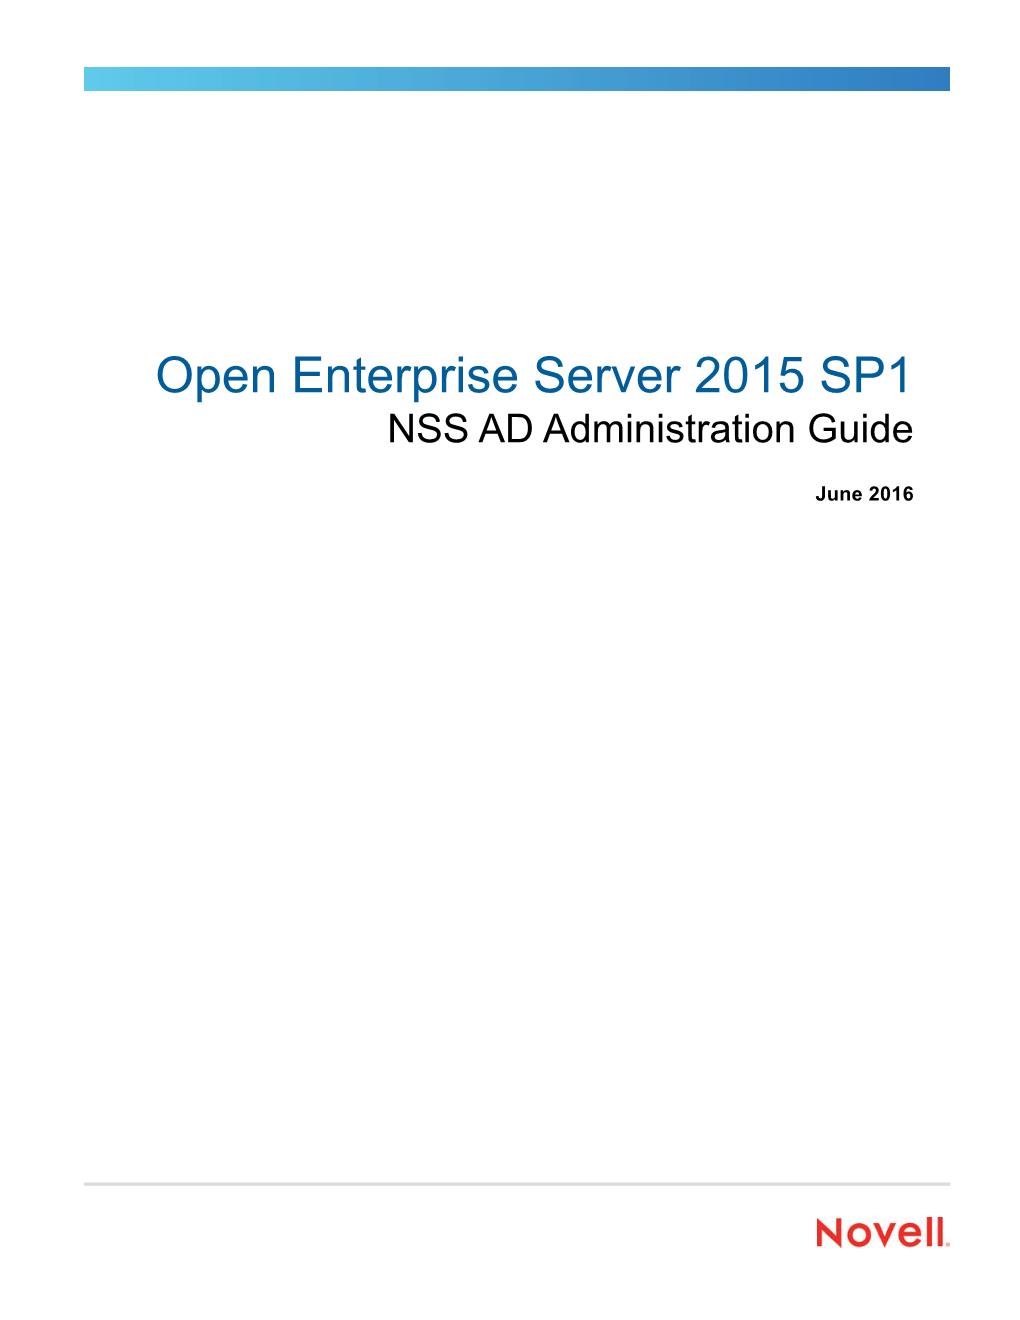 OES 2015 SP1: NSS AD Administration Guide